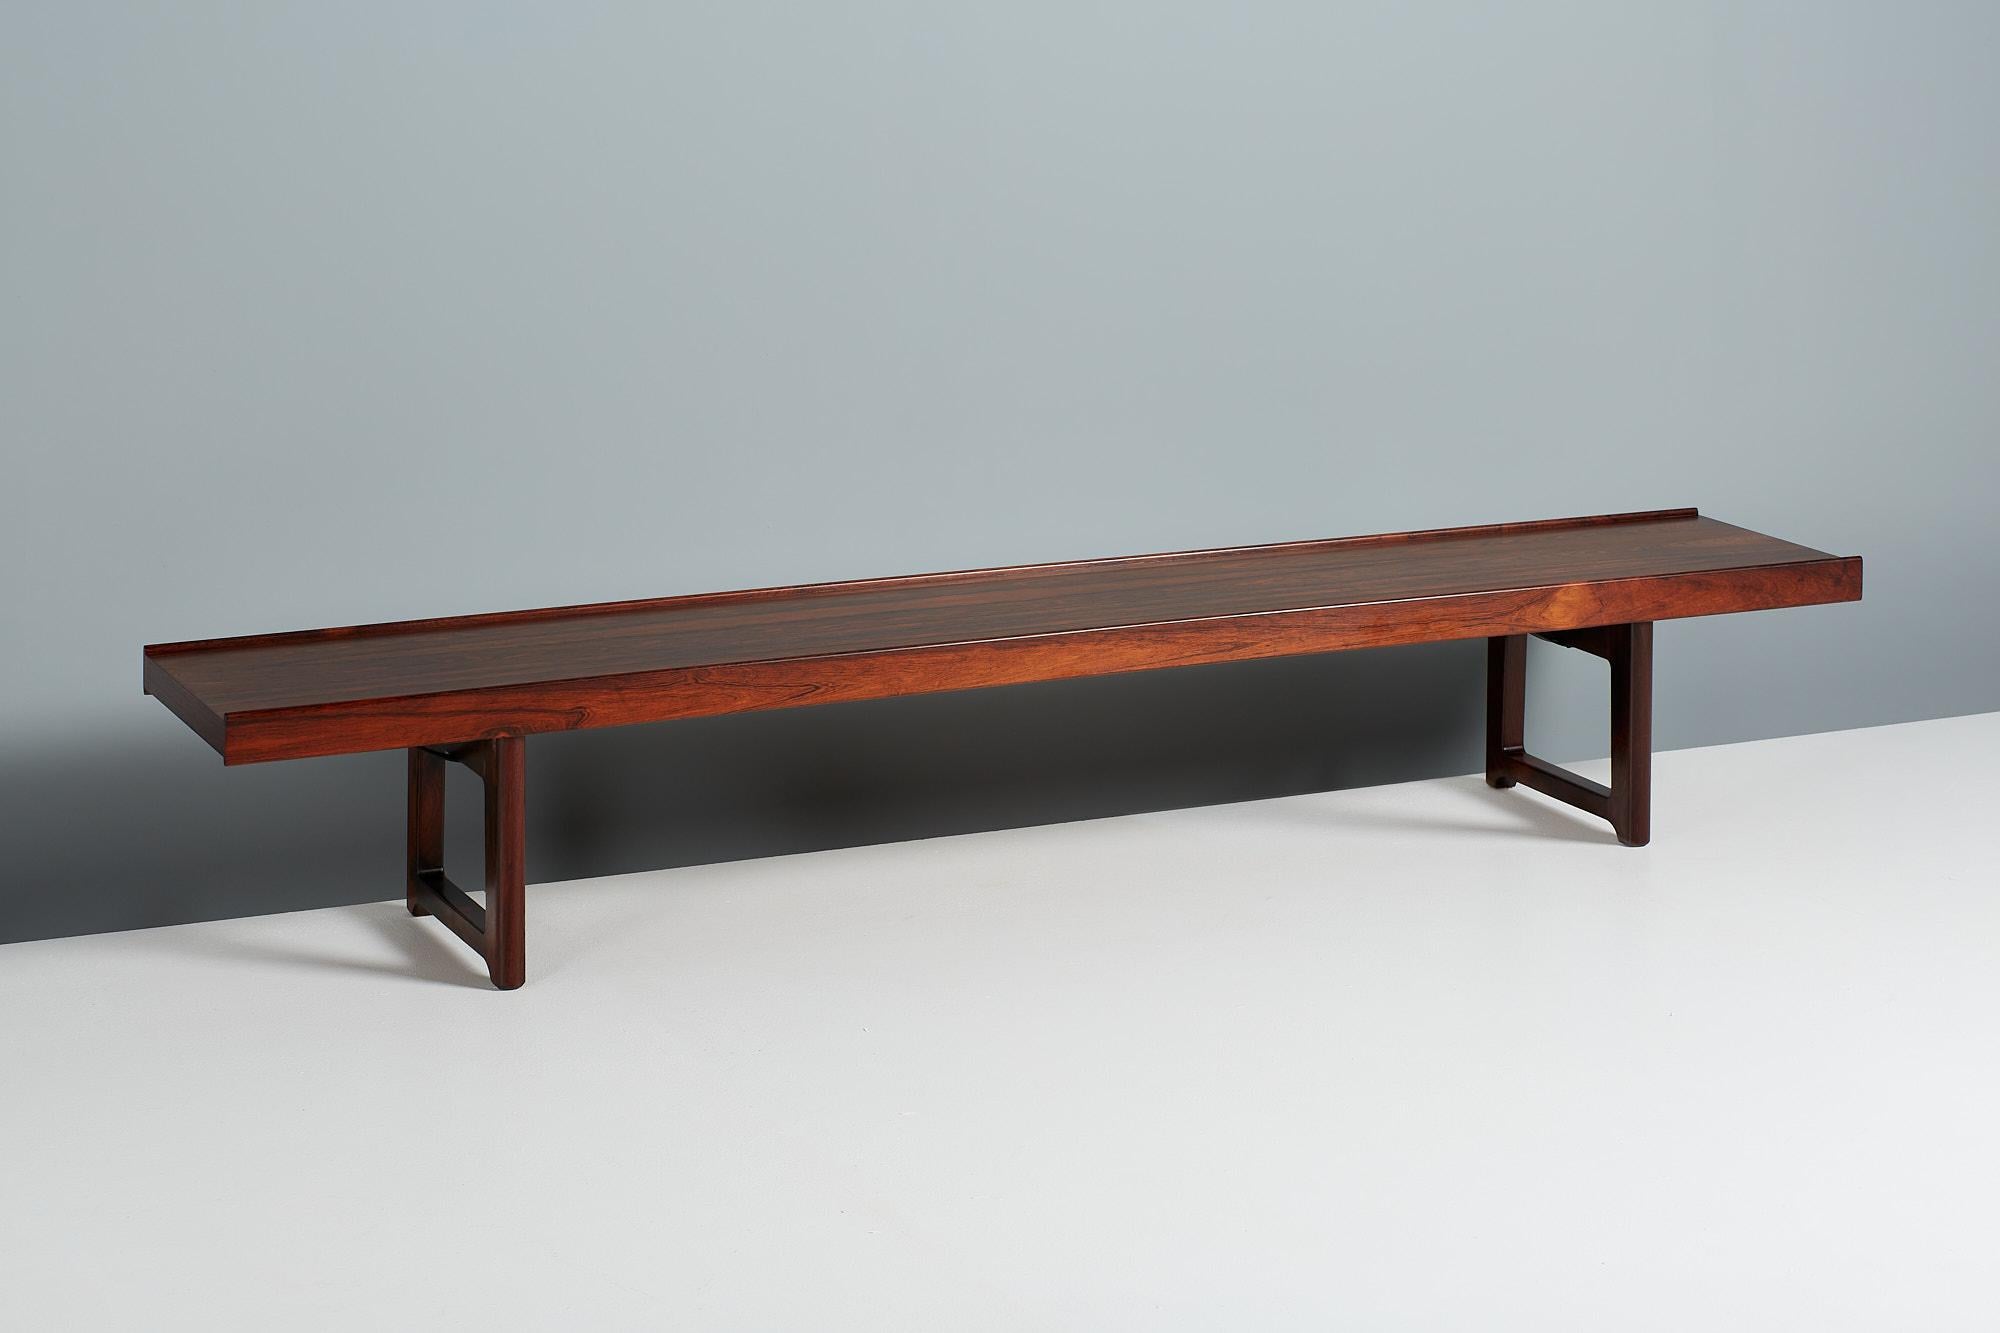 Torbjørn Afdal - 2m Krobo Bench, c1960

Iconic midcentury design from Norway. Torbjorn Afdal's Krobo bench, circa 1960 was designed as a multipurpose bench for producer Bruksbo and can also be used as a low coffee table. This example comes in